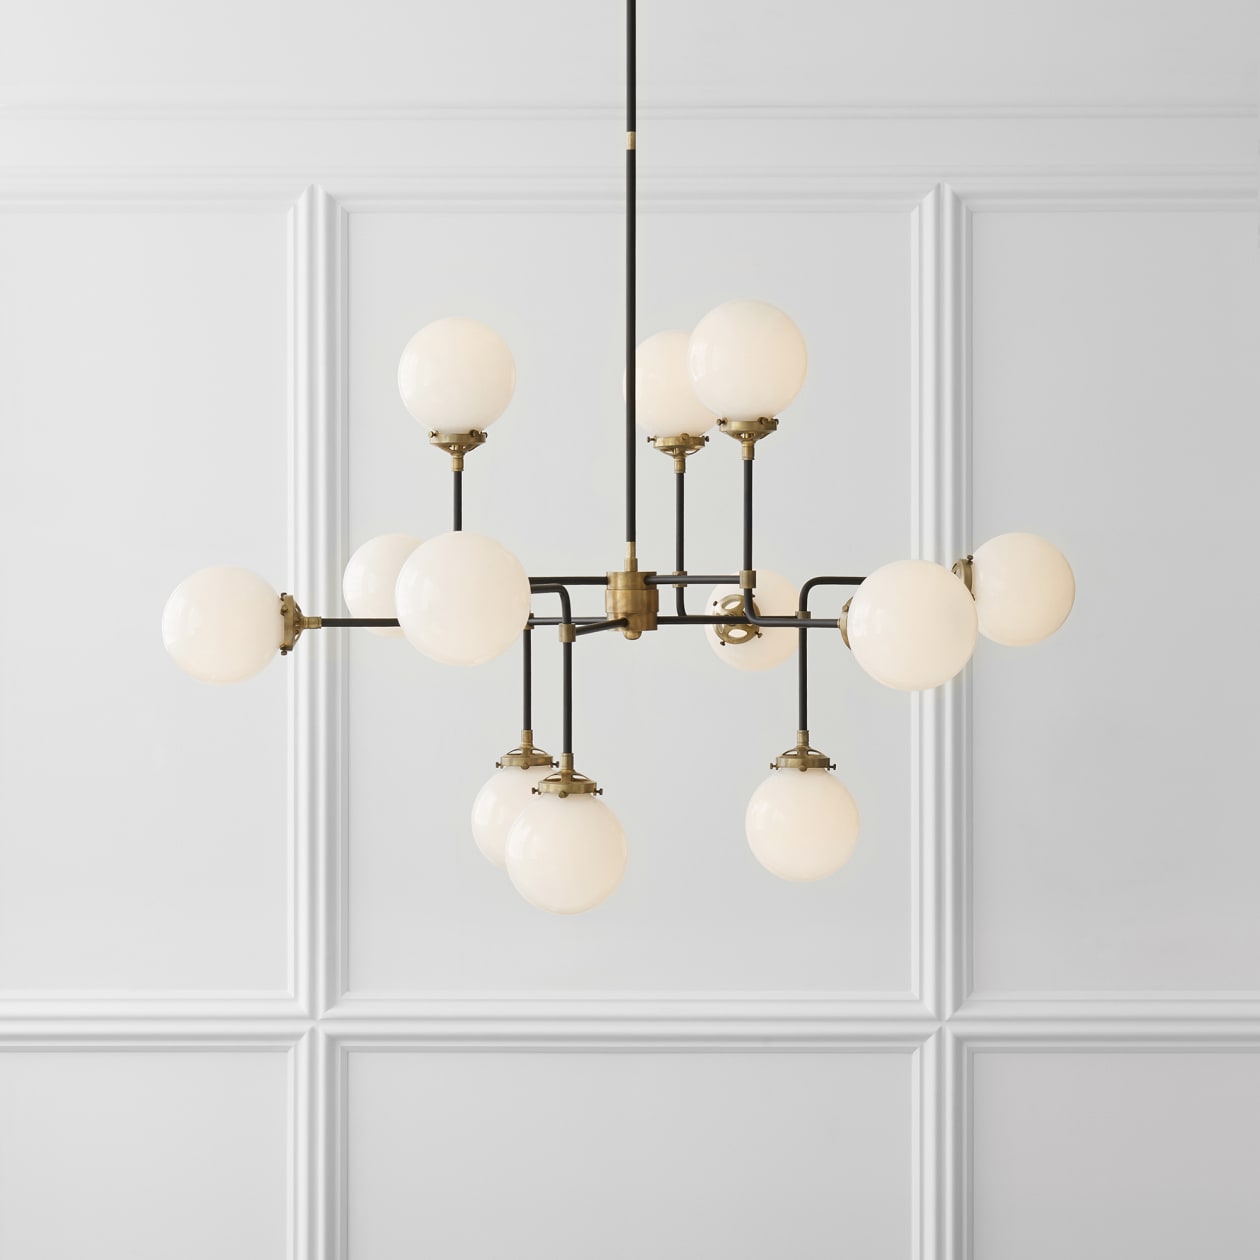 Wimberley Wall Sconce by Visual Comfort Signature at